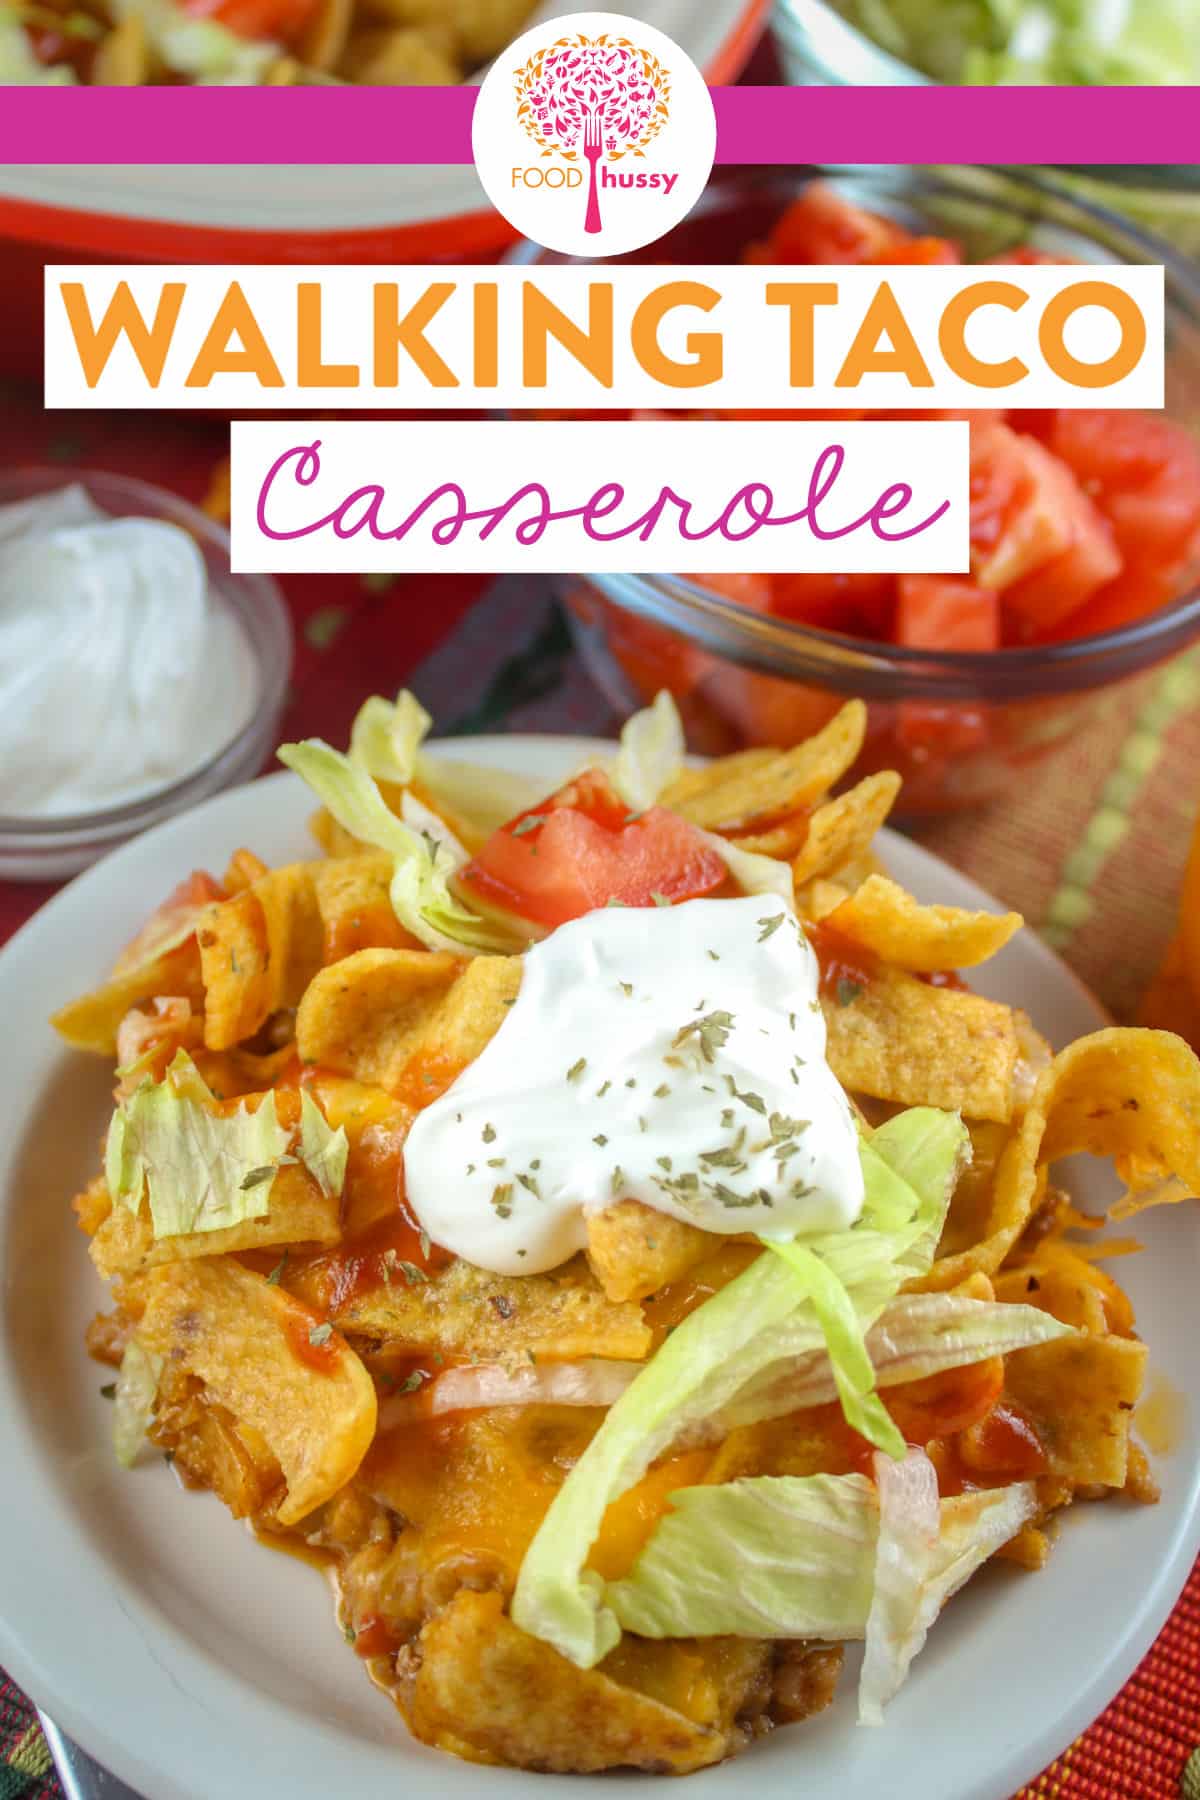 Walking Taco Casserole will bring back the memories of Walking Tacos! This casserole is packed with taco meat, cheese, lettuce, tomatoes, sour cream & chips! via @foodhussy